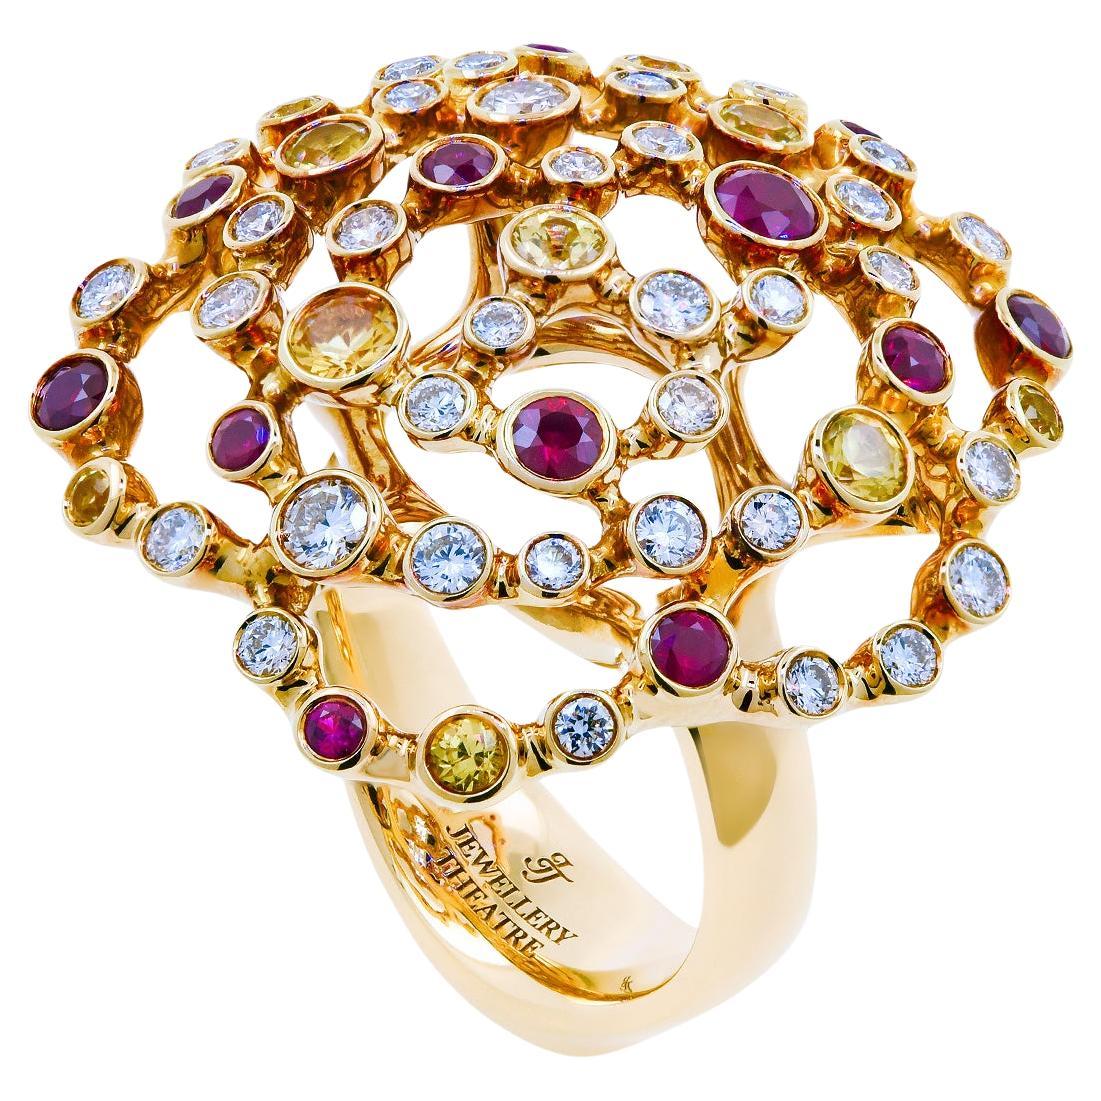 18 Karat Yellow Gold 0.85 Ct Diamonds Rubies Yellow Sapphires Cocktail Ring For Sale